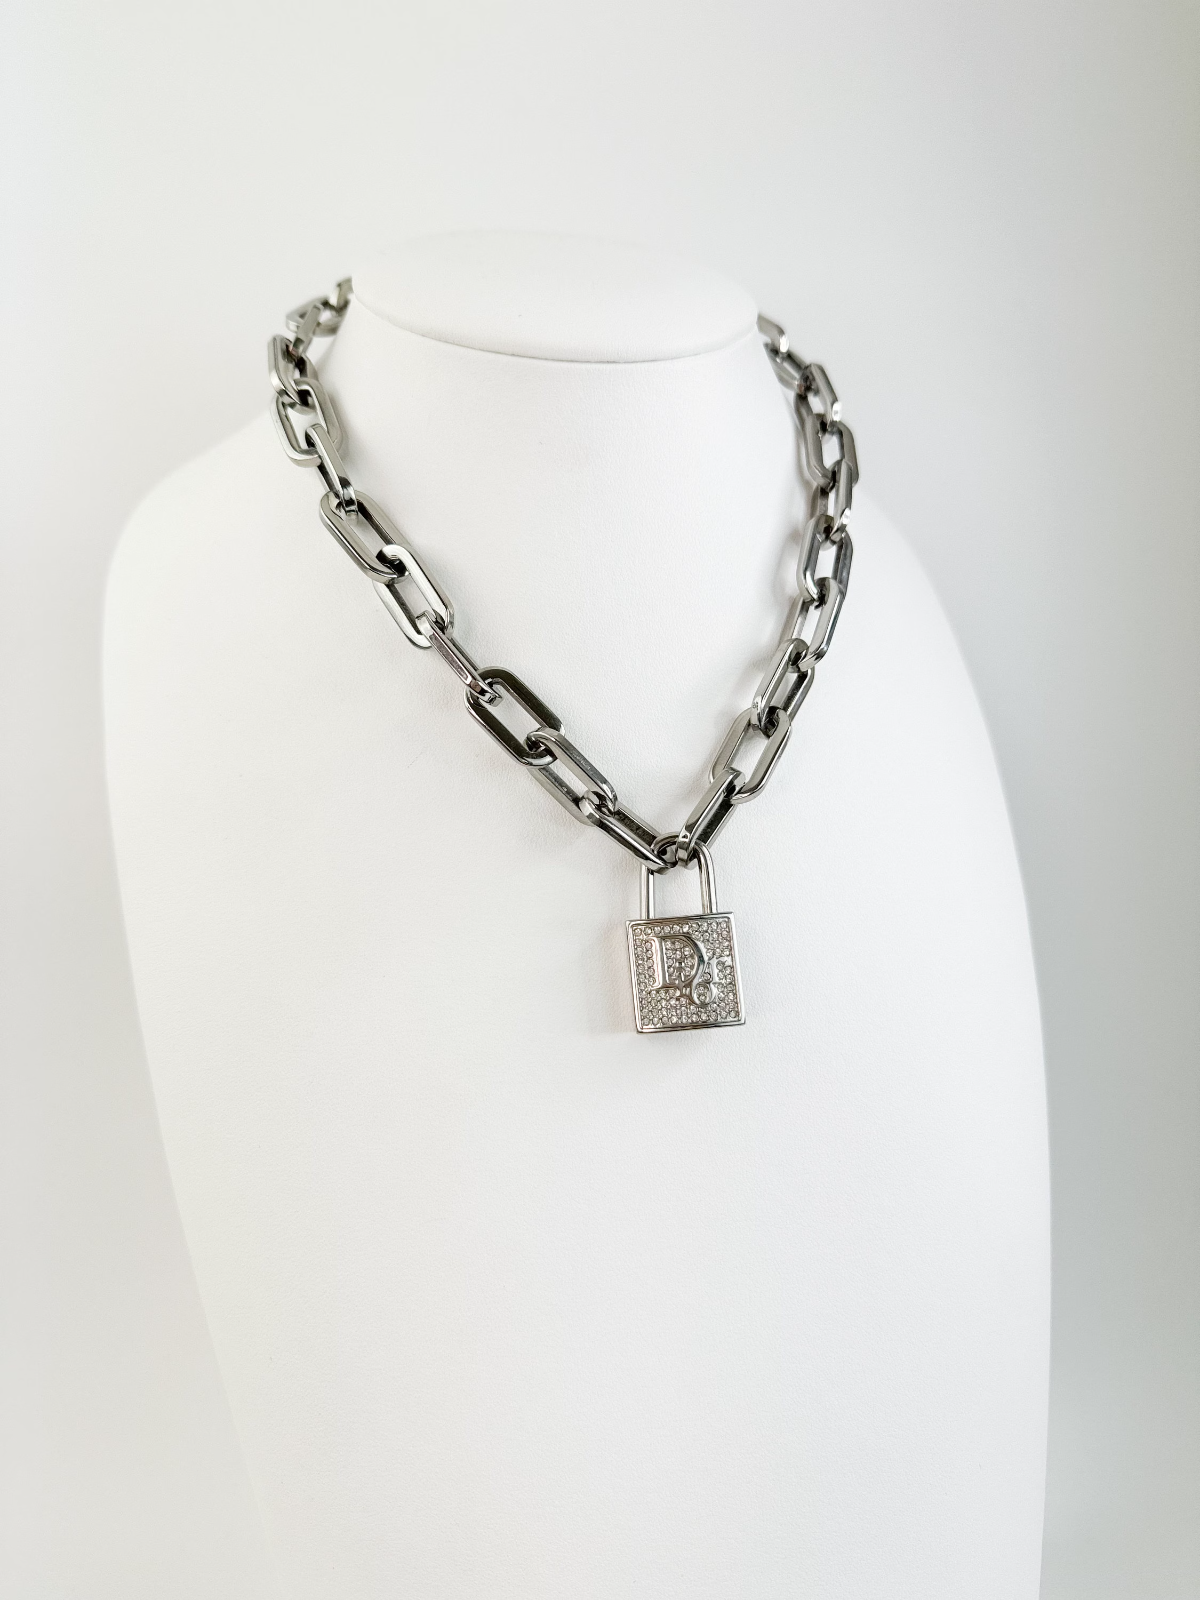 Vintage Christian Dior chunky choker Padlock key,  Chain Necklace, Silver Tone Chain Necklace , Vintage Costume Jewelry, Necklace Large